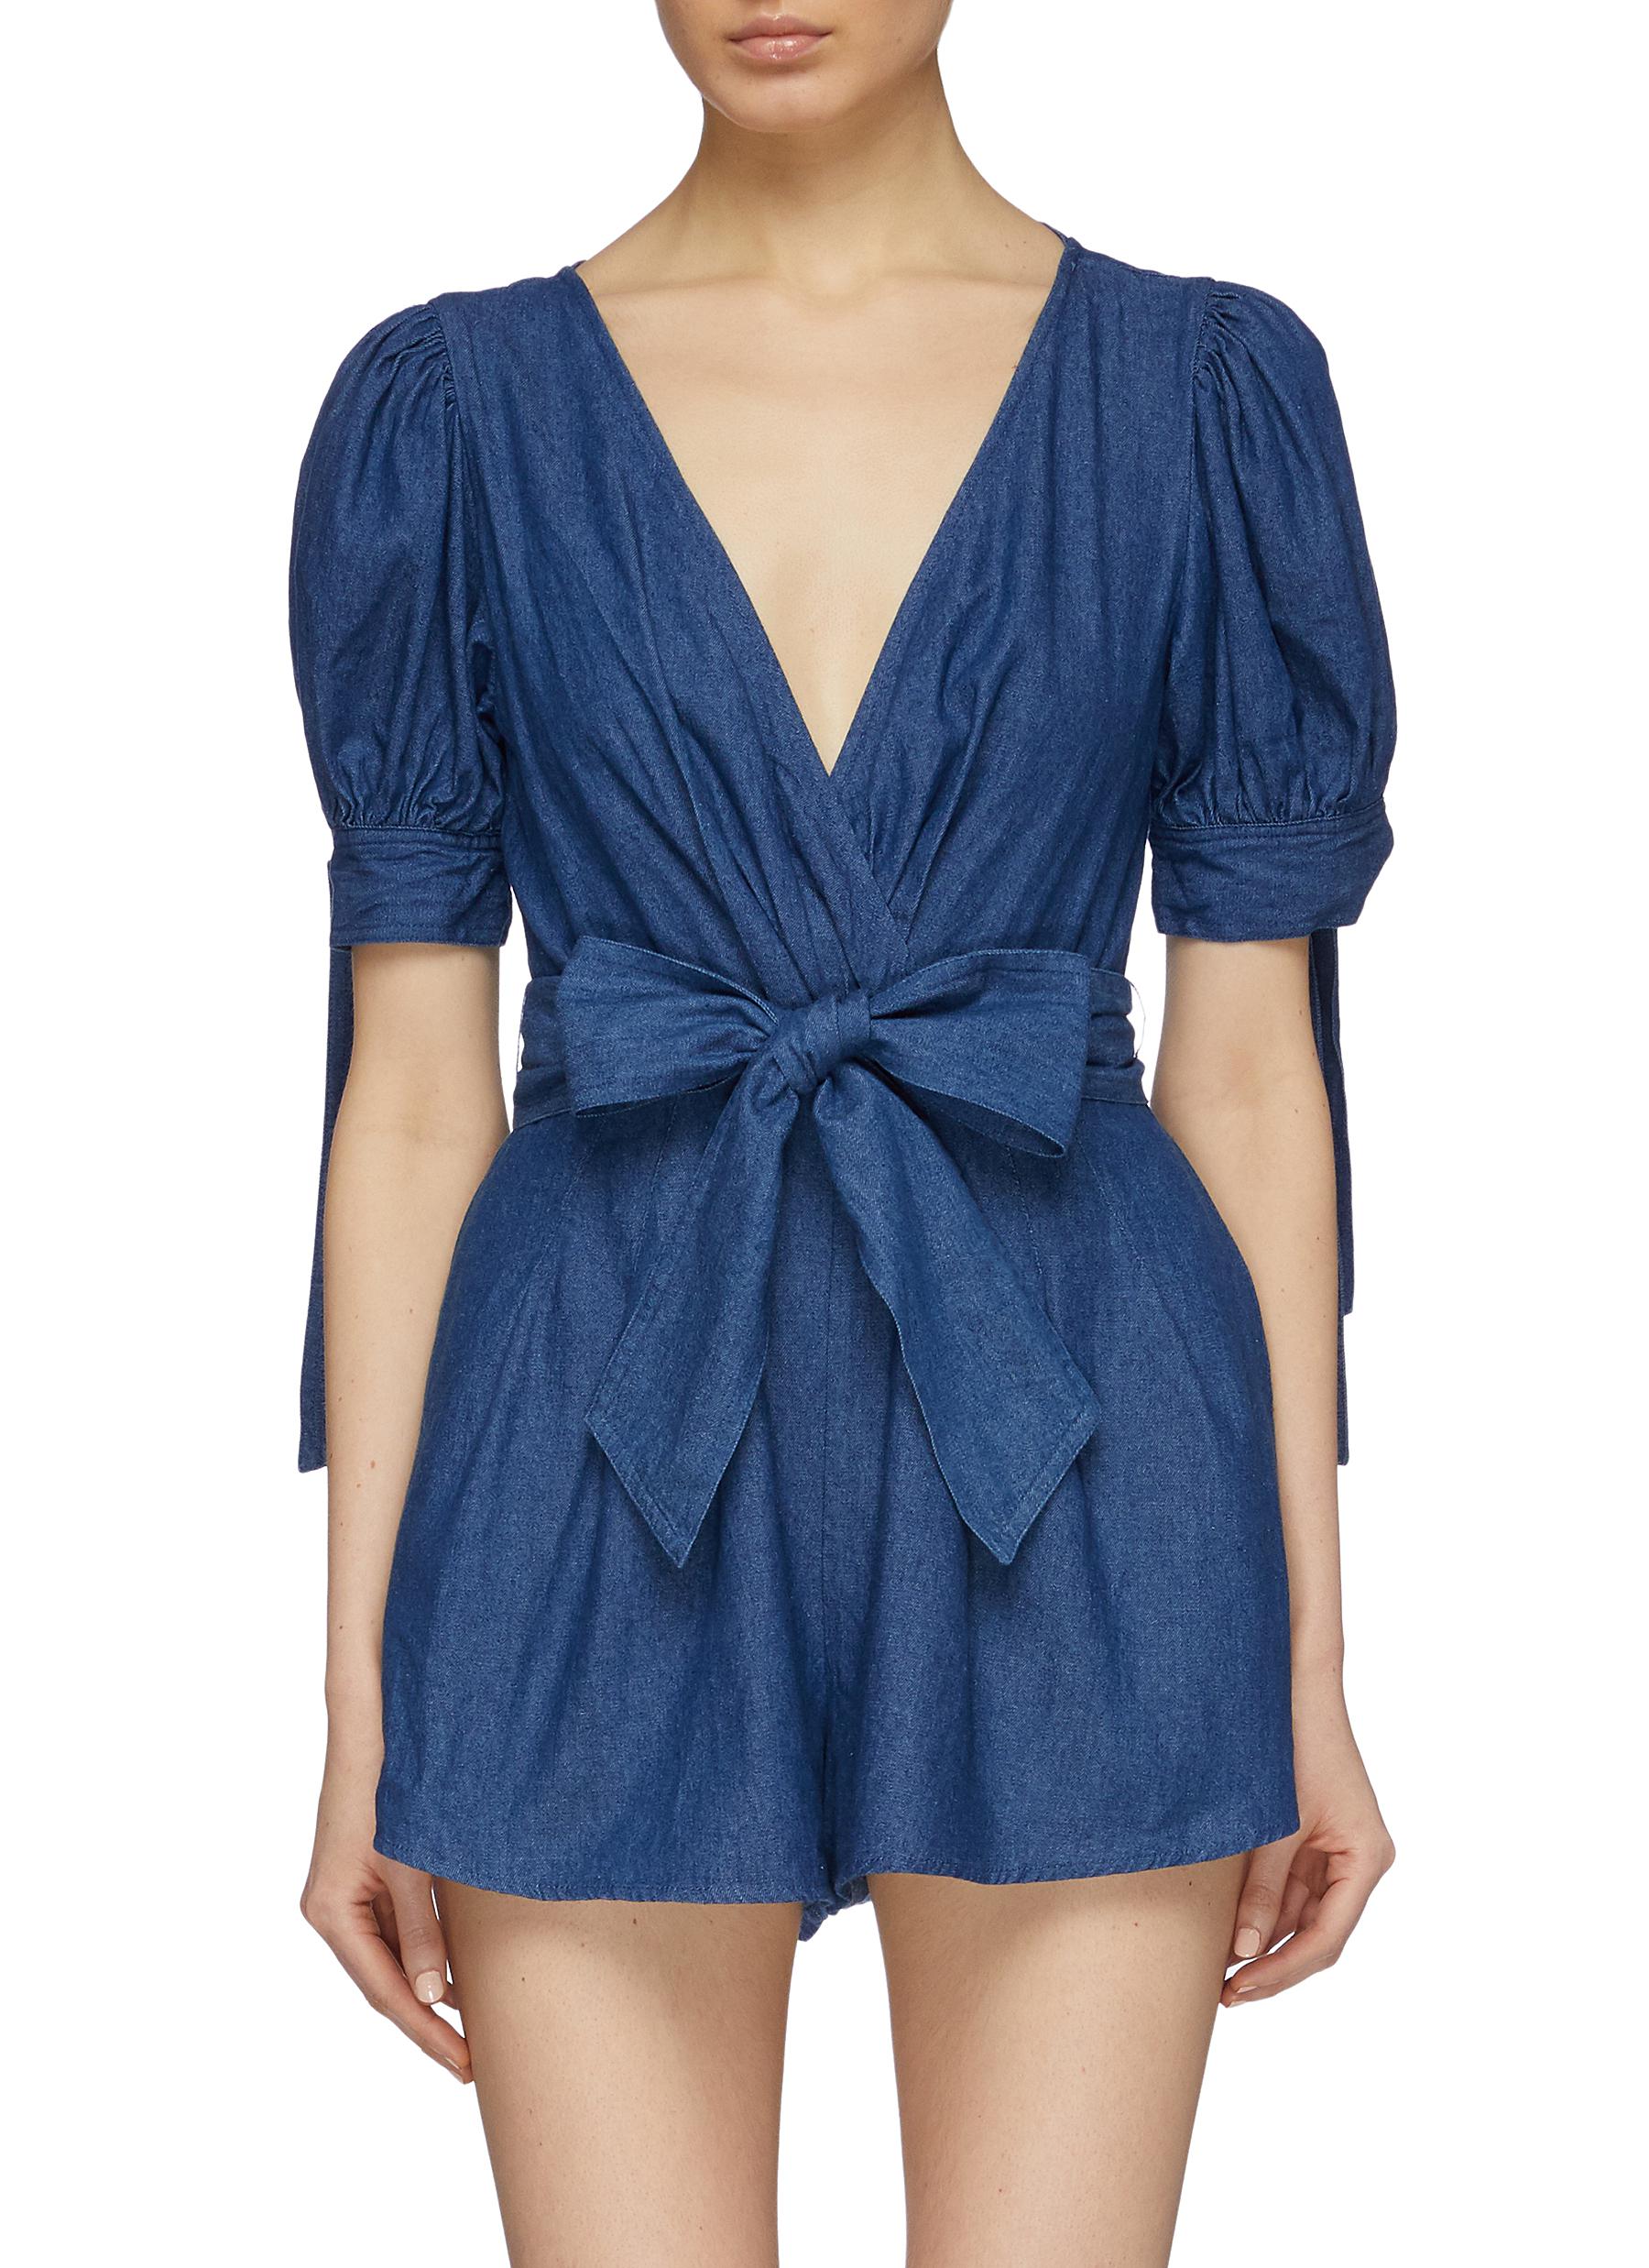 Kind To You cross back puff sleeve denim rompers by C/Meo Collective